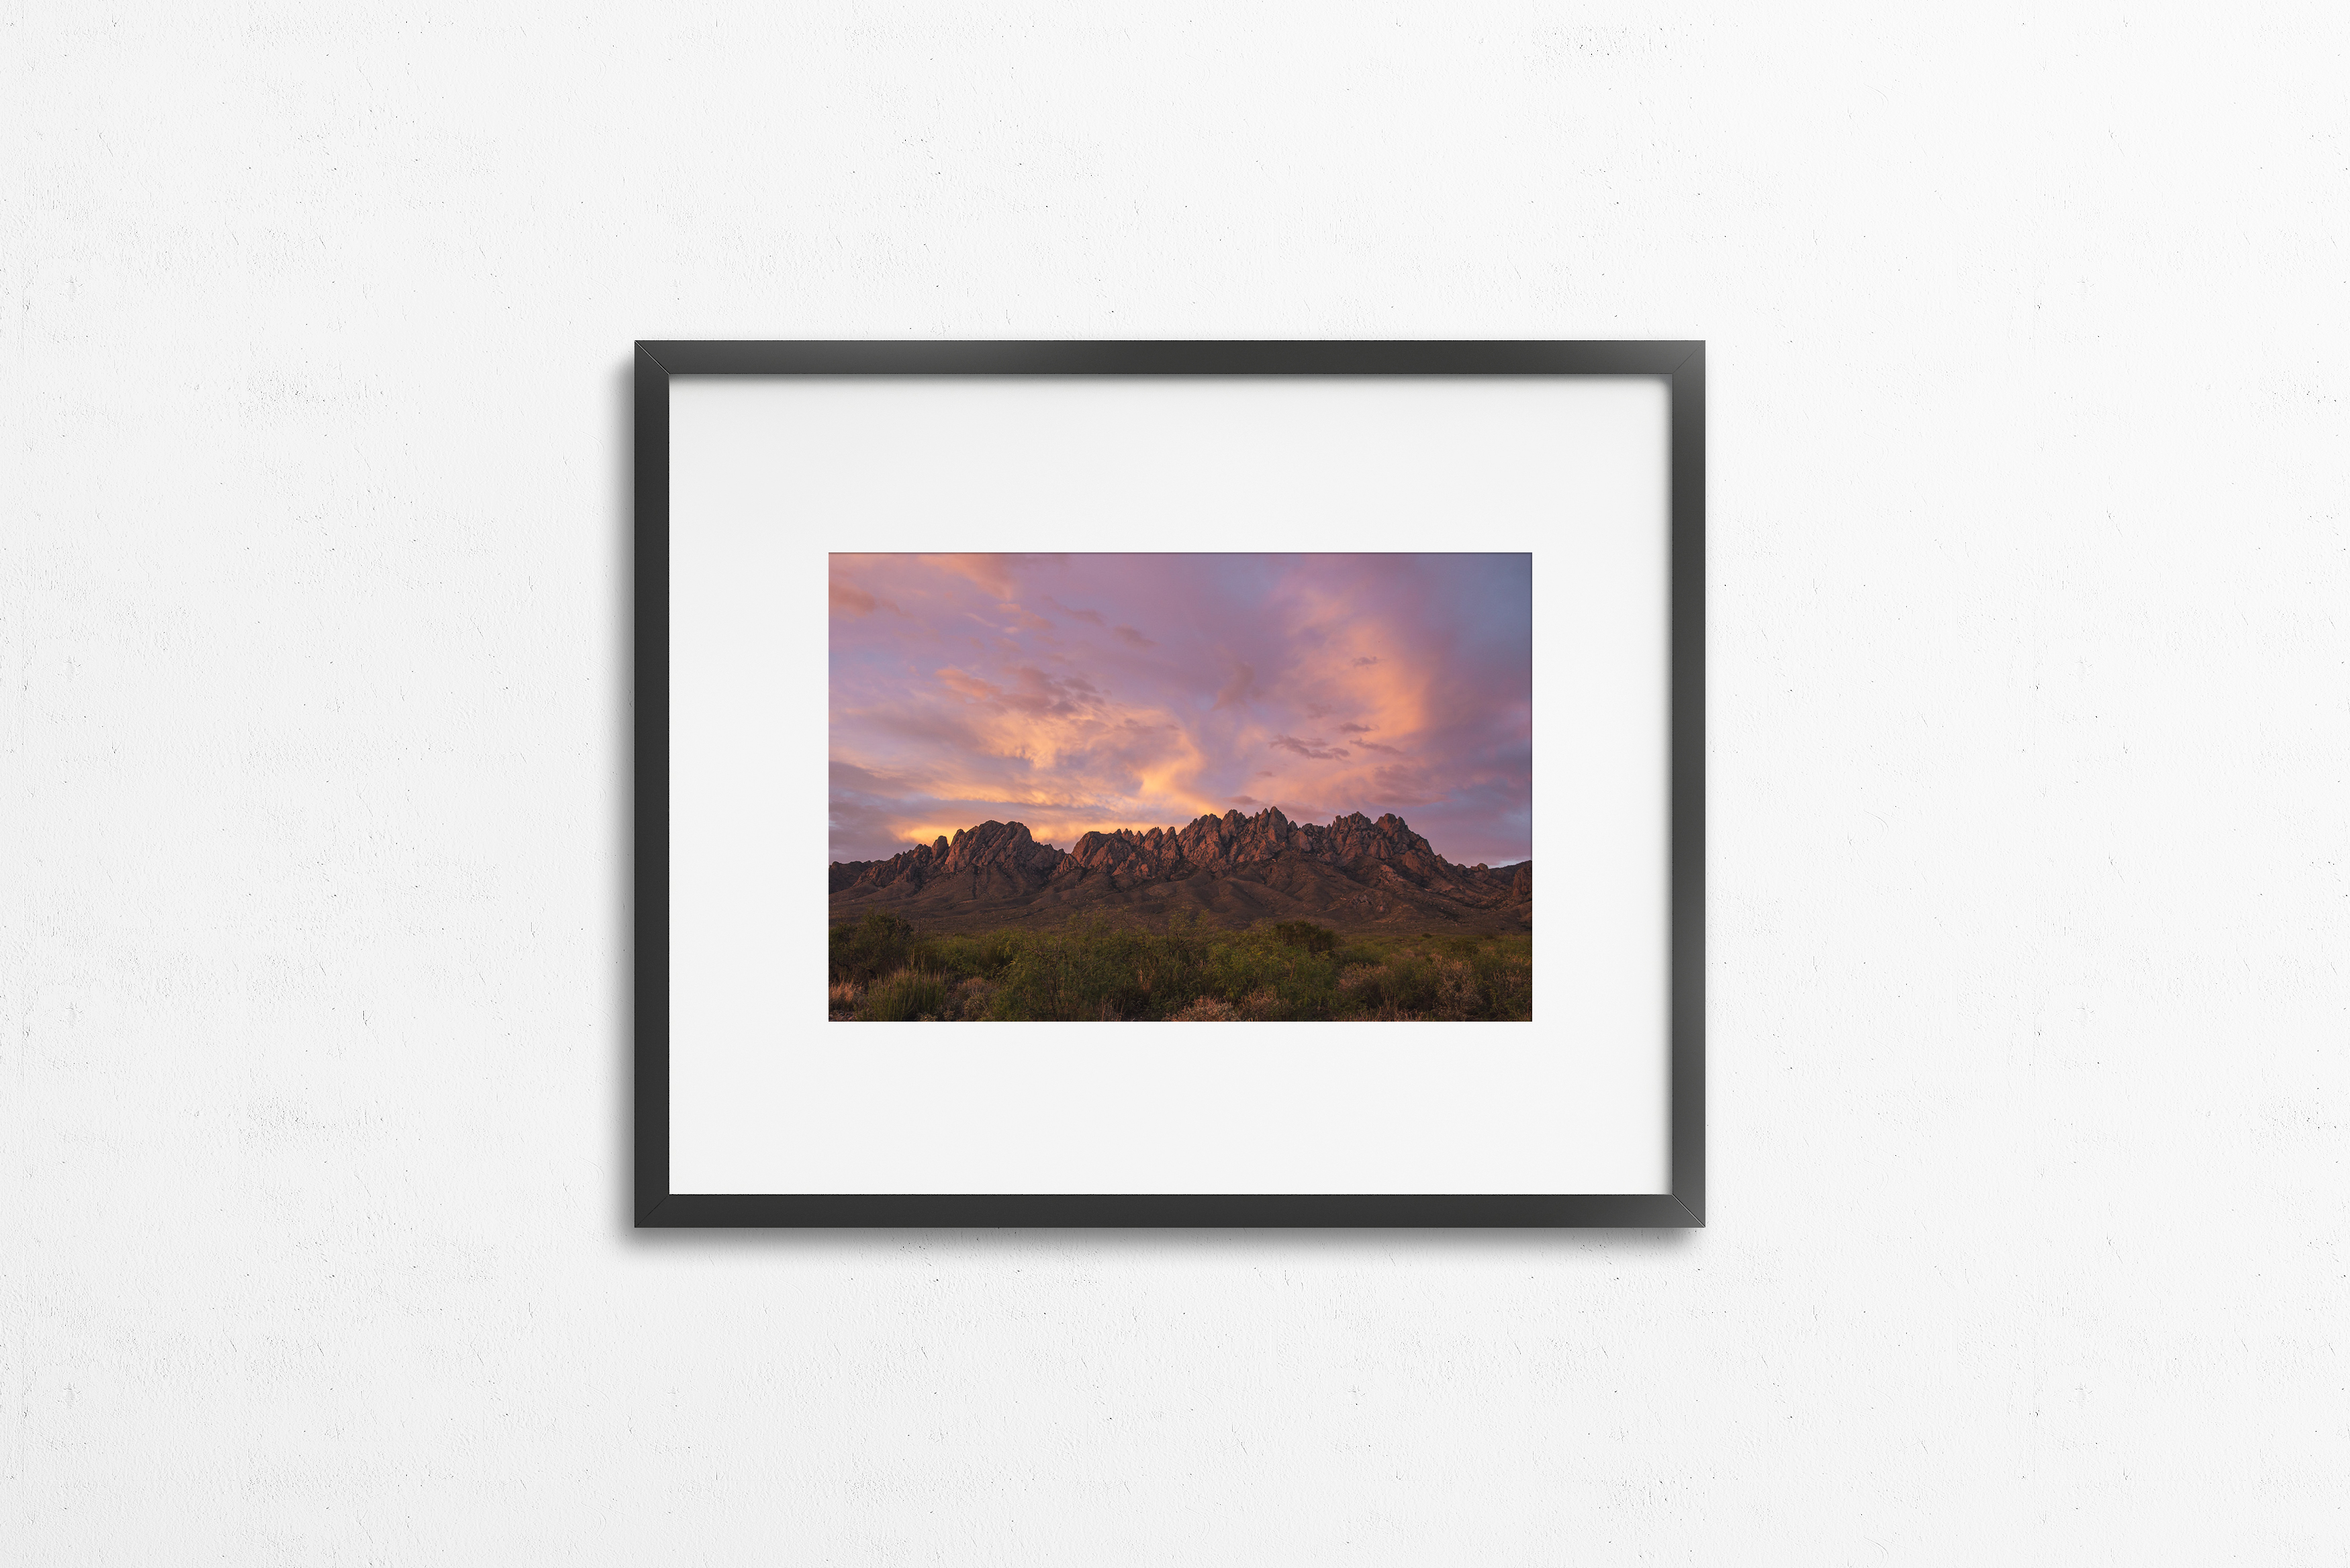 Photography: Organ Mountain Spring Sunset - Organ Mountain Outfitters